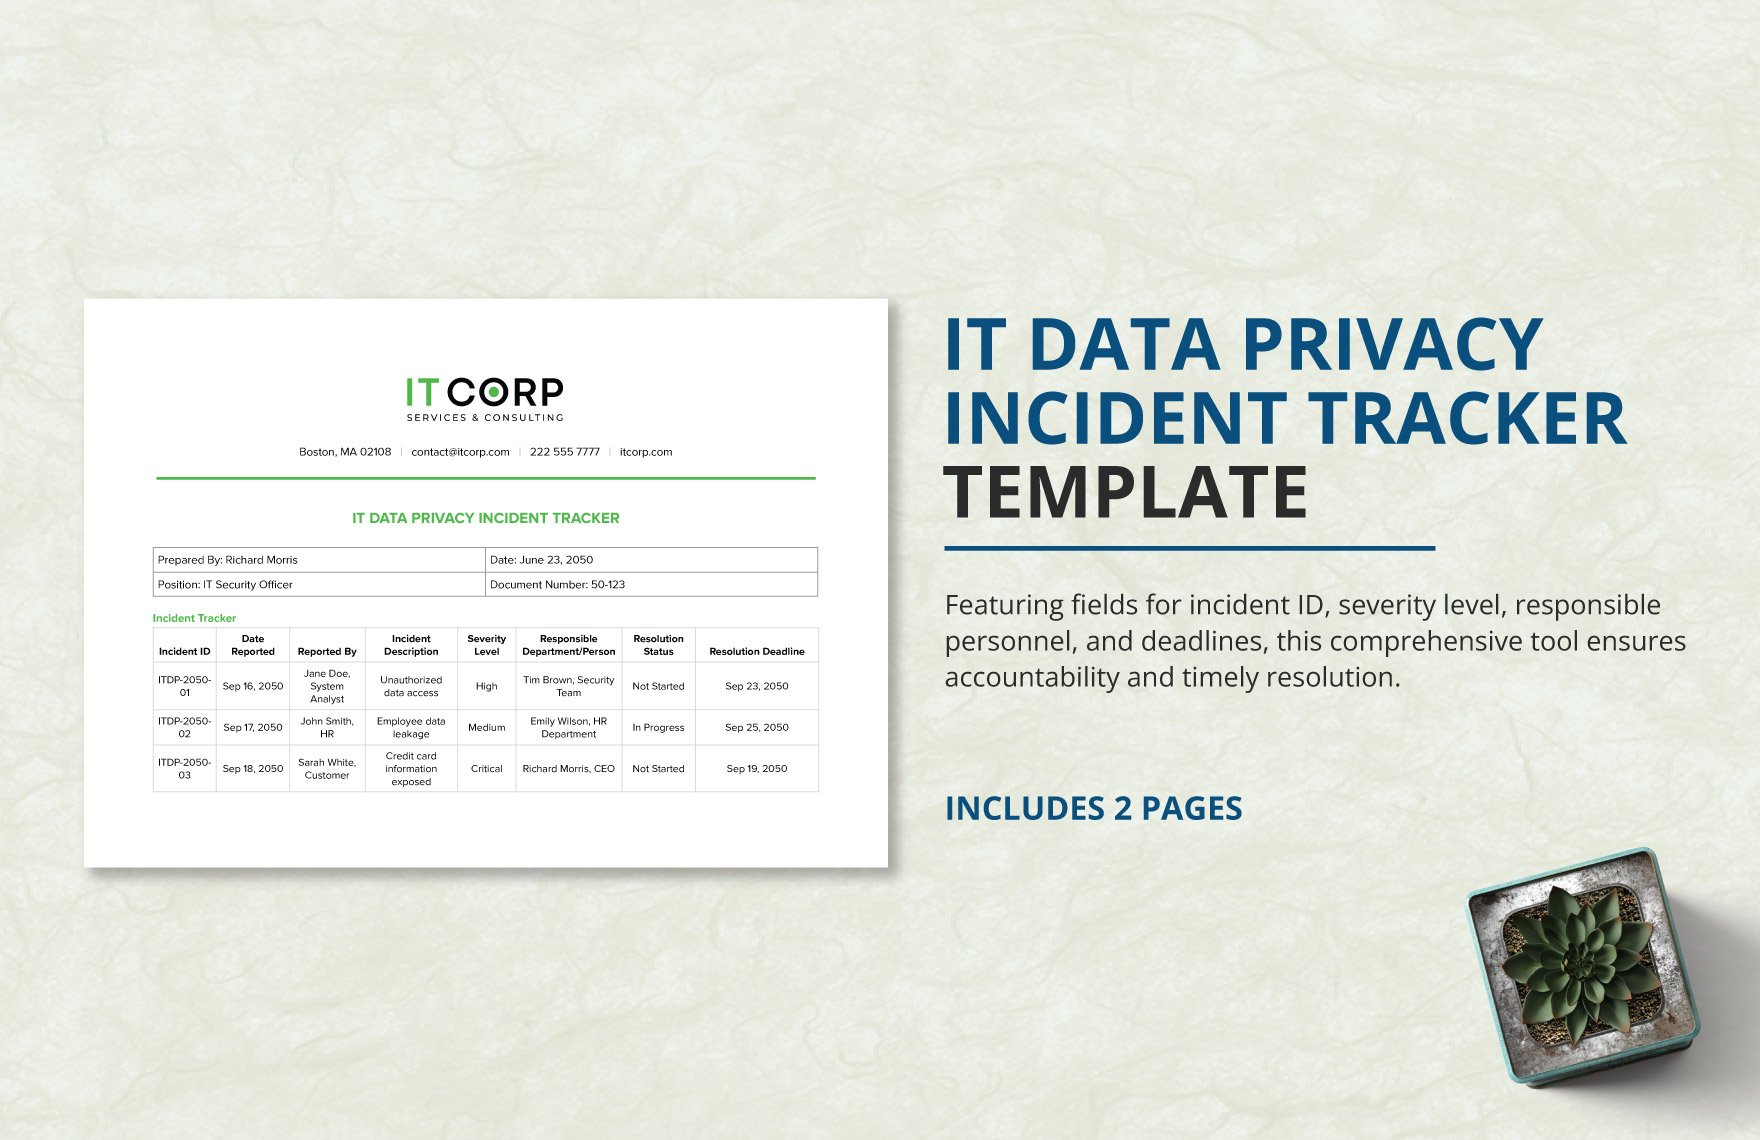 IT Data Privacy Incident Tracker Template